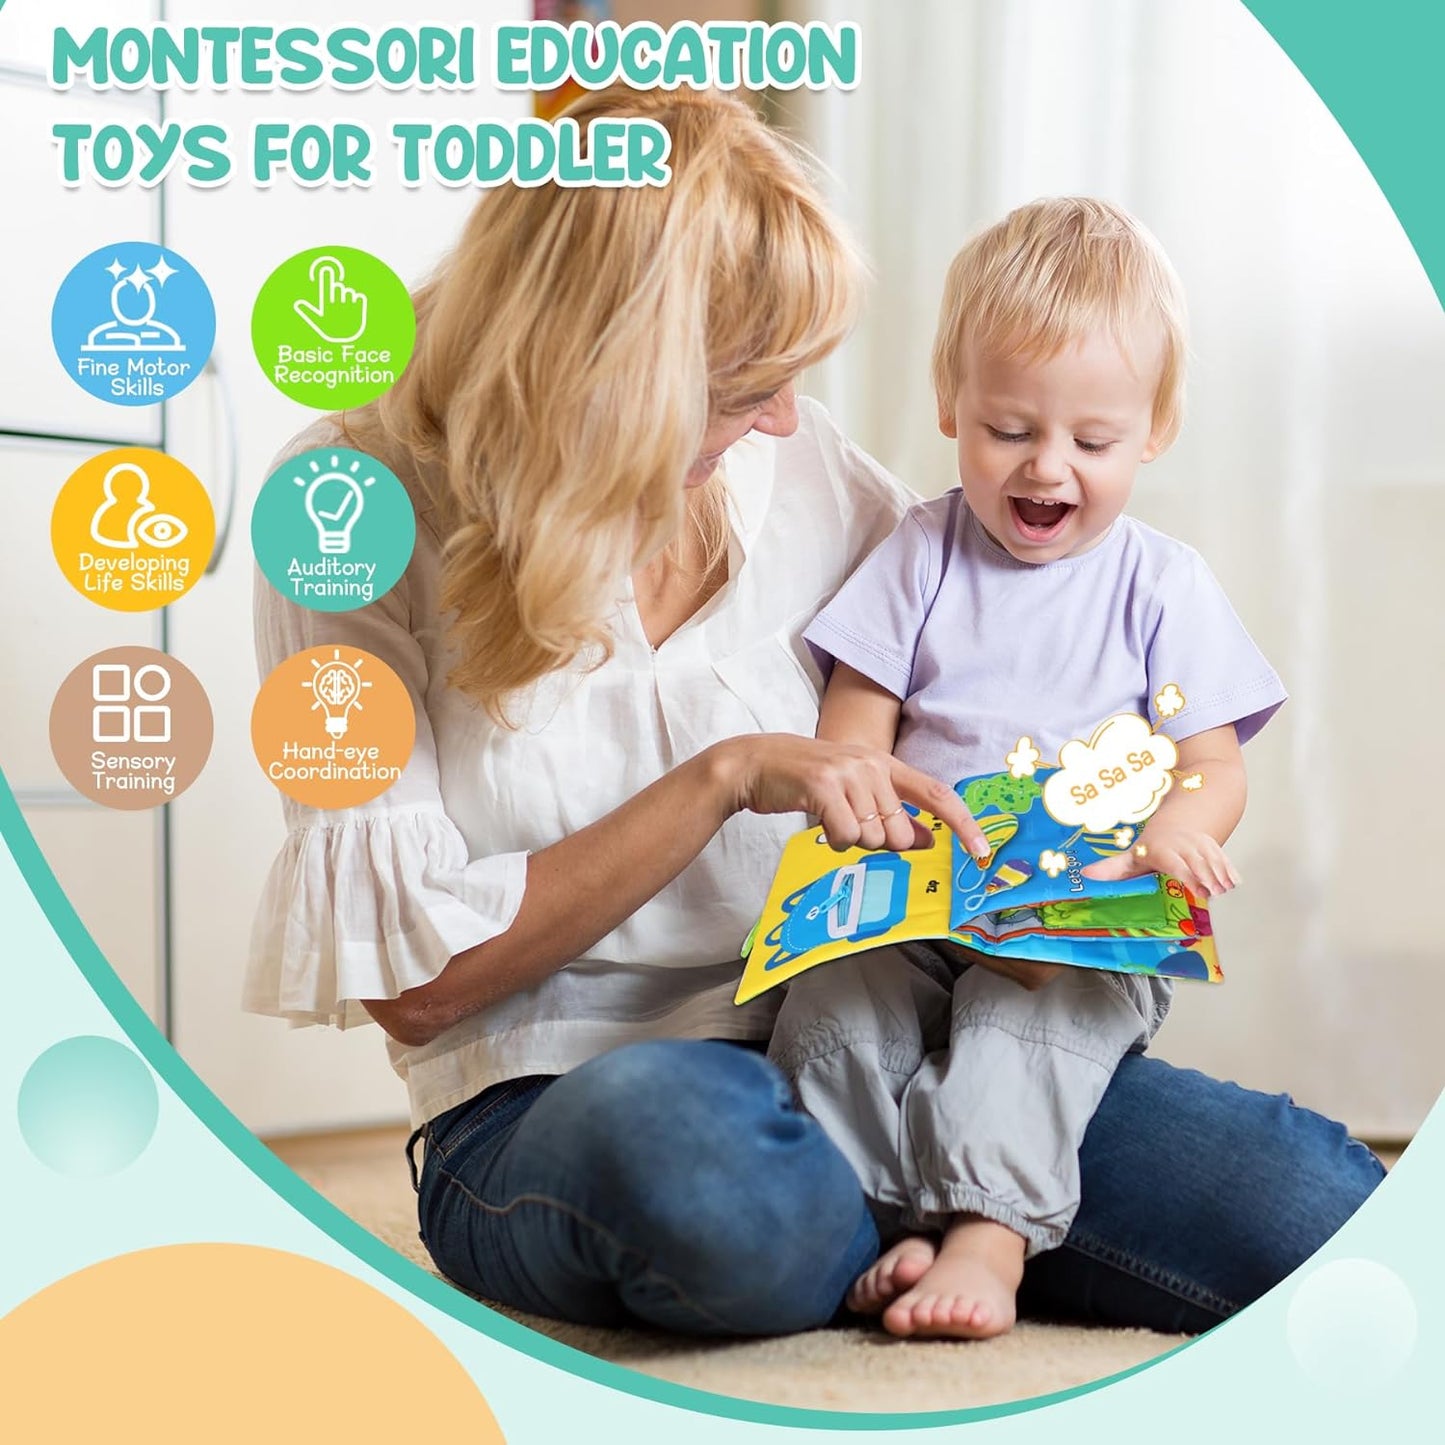 Baby Books Toys 0-18 Months, Montessori Toys for Infant Newborn Activity Soft Book with Mirror Squeaky Sounds, 8-Page Early Development Travel Toys Birthdays Gifts for Toddler Motor Skills